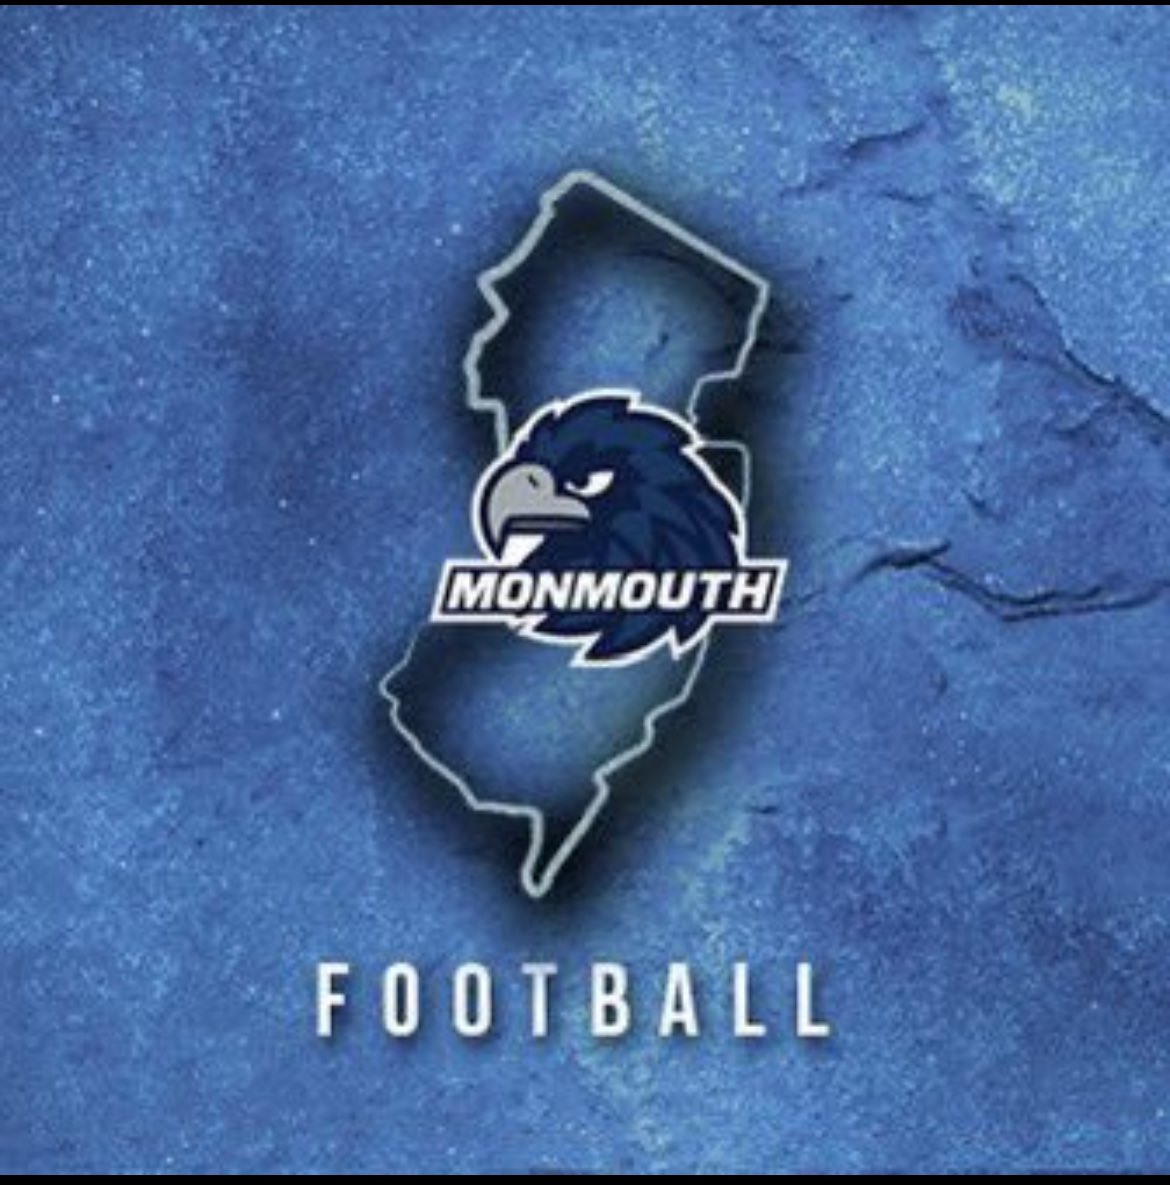 After a great conversation with Coach @RoboLeonard @Coach_BNeal @lew_walk7! Of @MonmouthHawks! I’m pleased to say I received my 11th offer it’s all apart of Gods plan NOW I WORK HARDER nobody cares 🫡🫡🦍